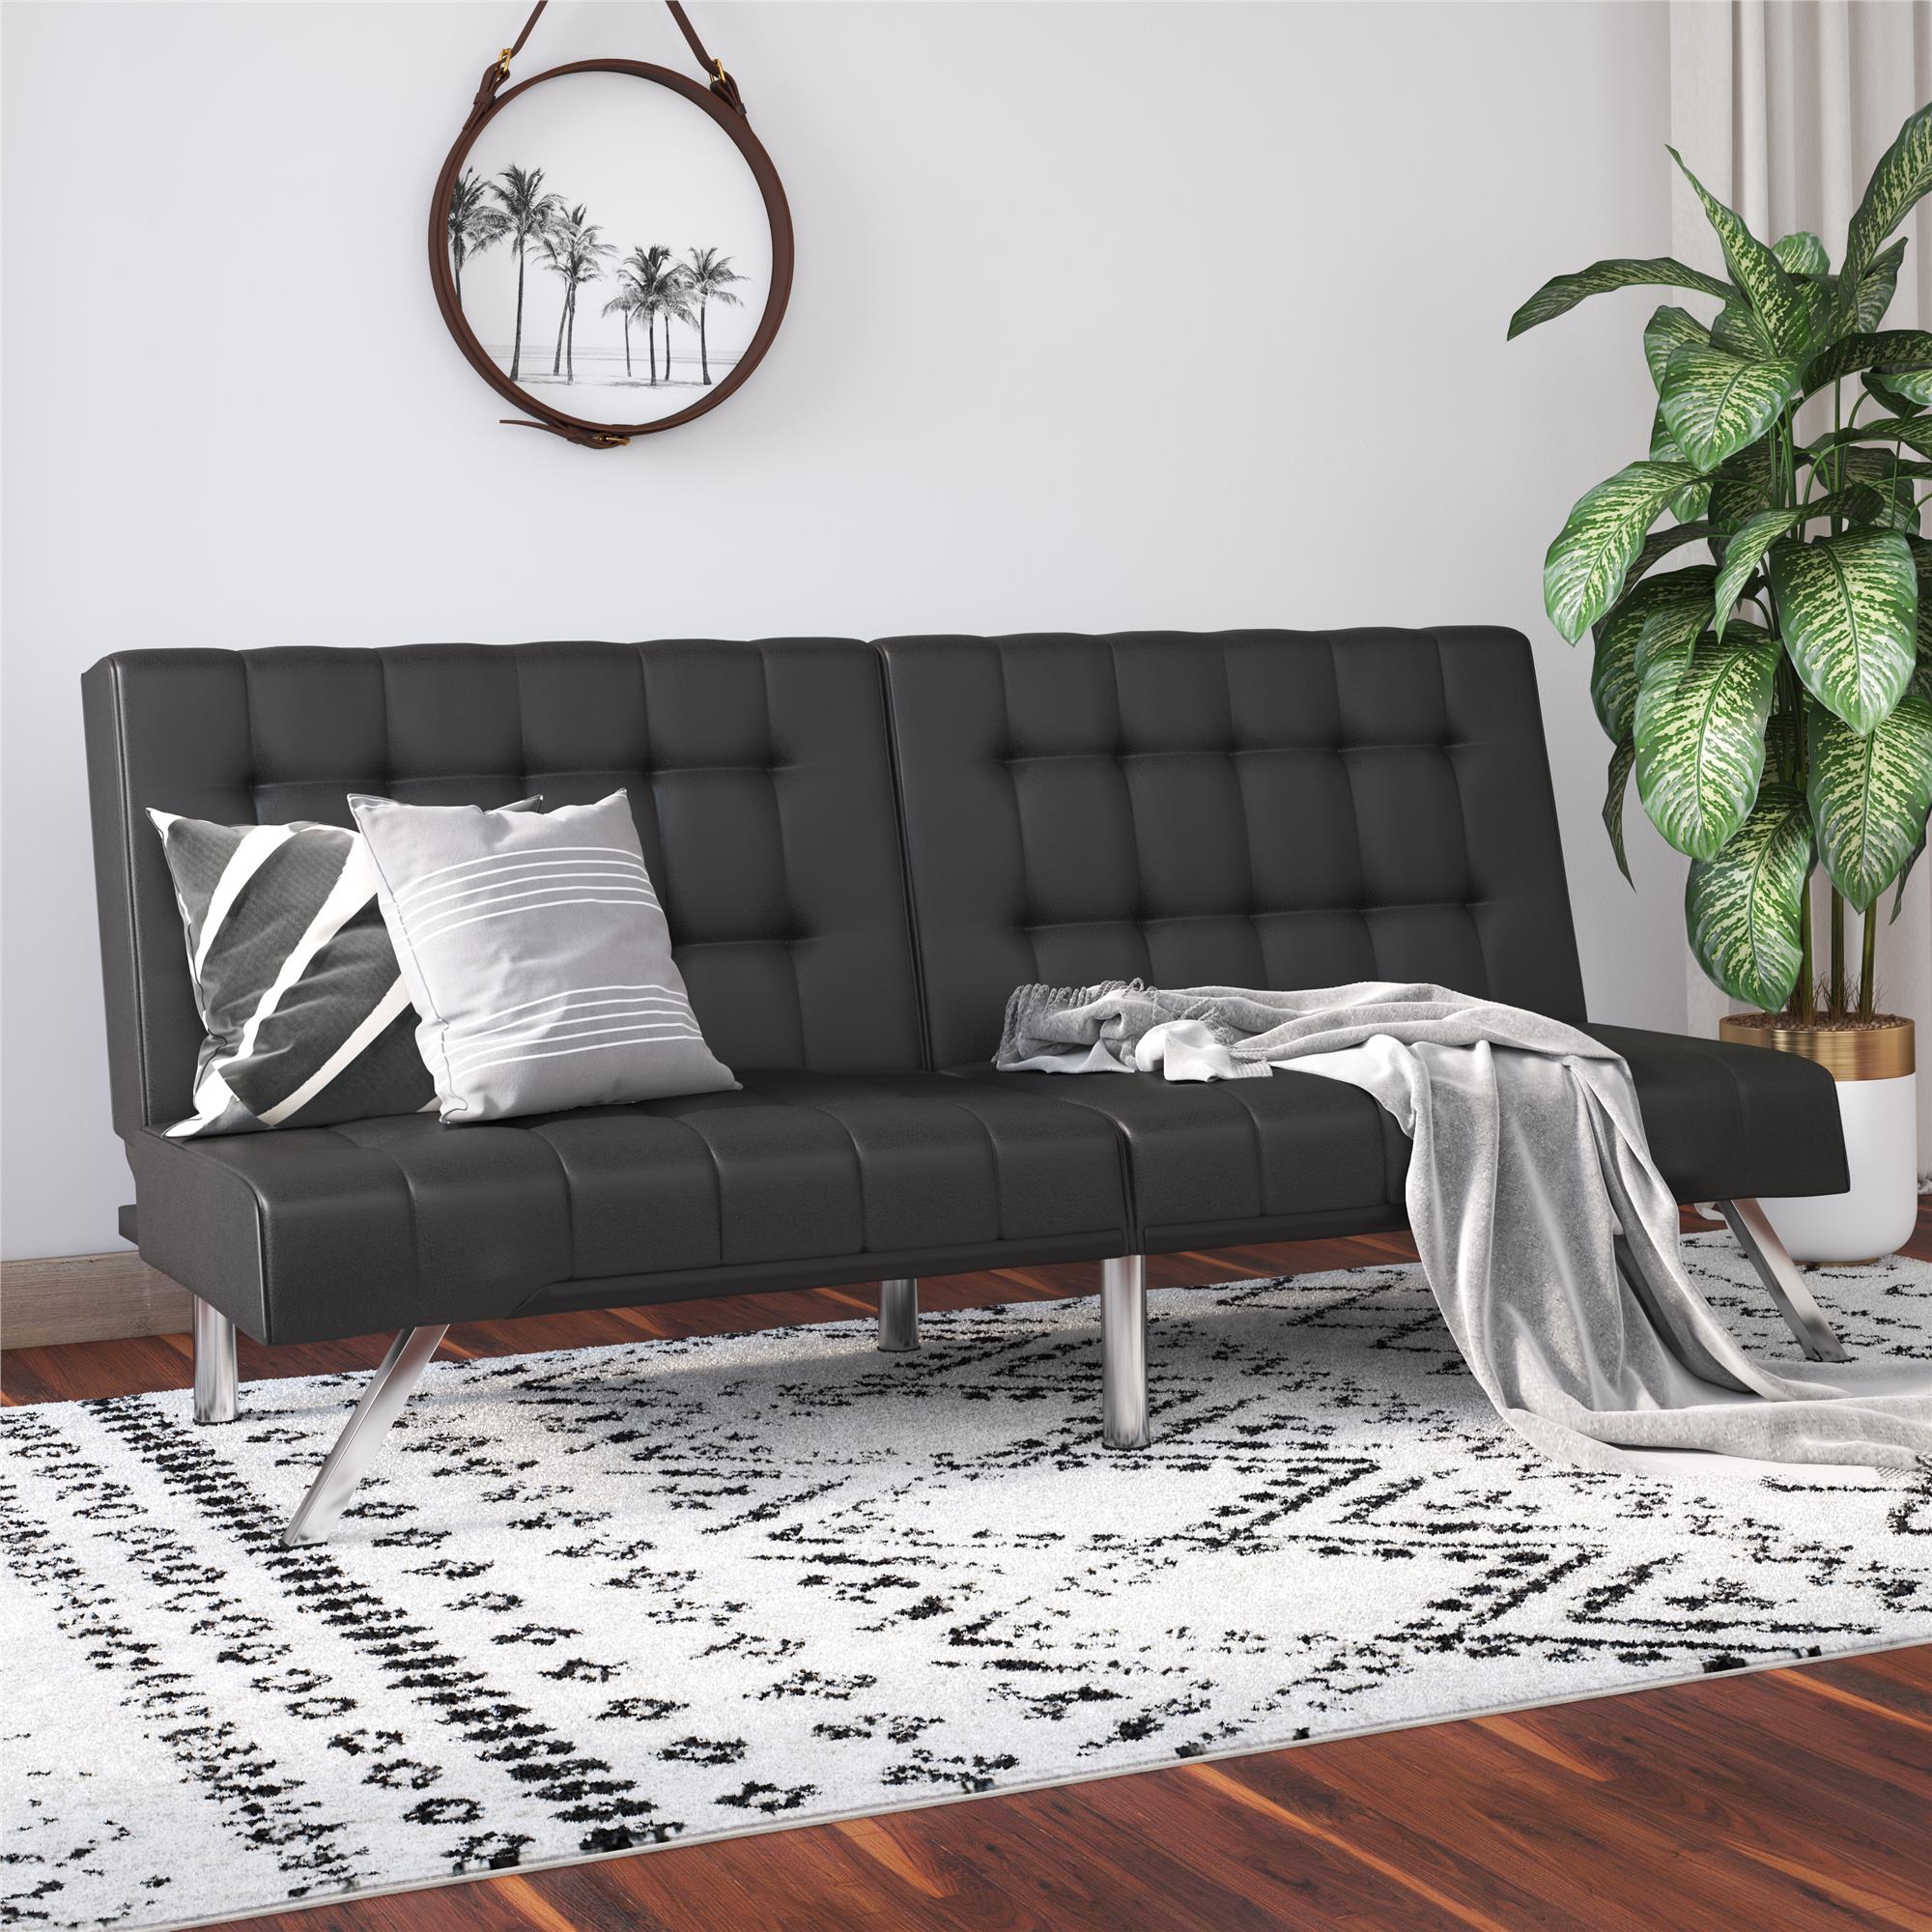 River Street Designs Emily Convertible Tufted Futon Sofa, Black Faux Leather - image 2 of 21